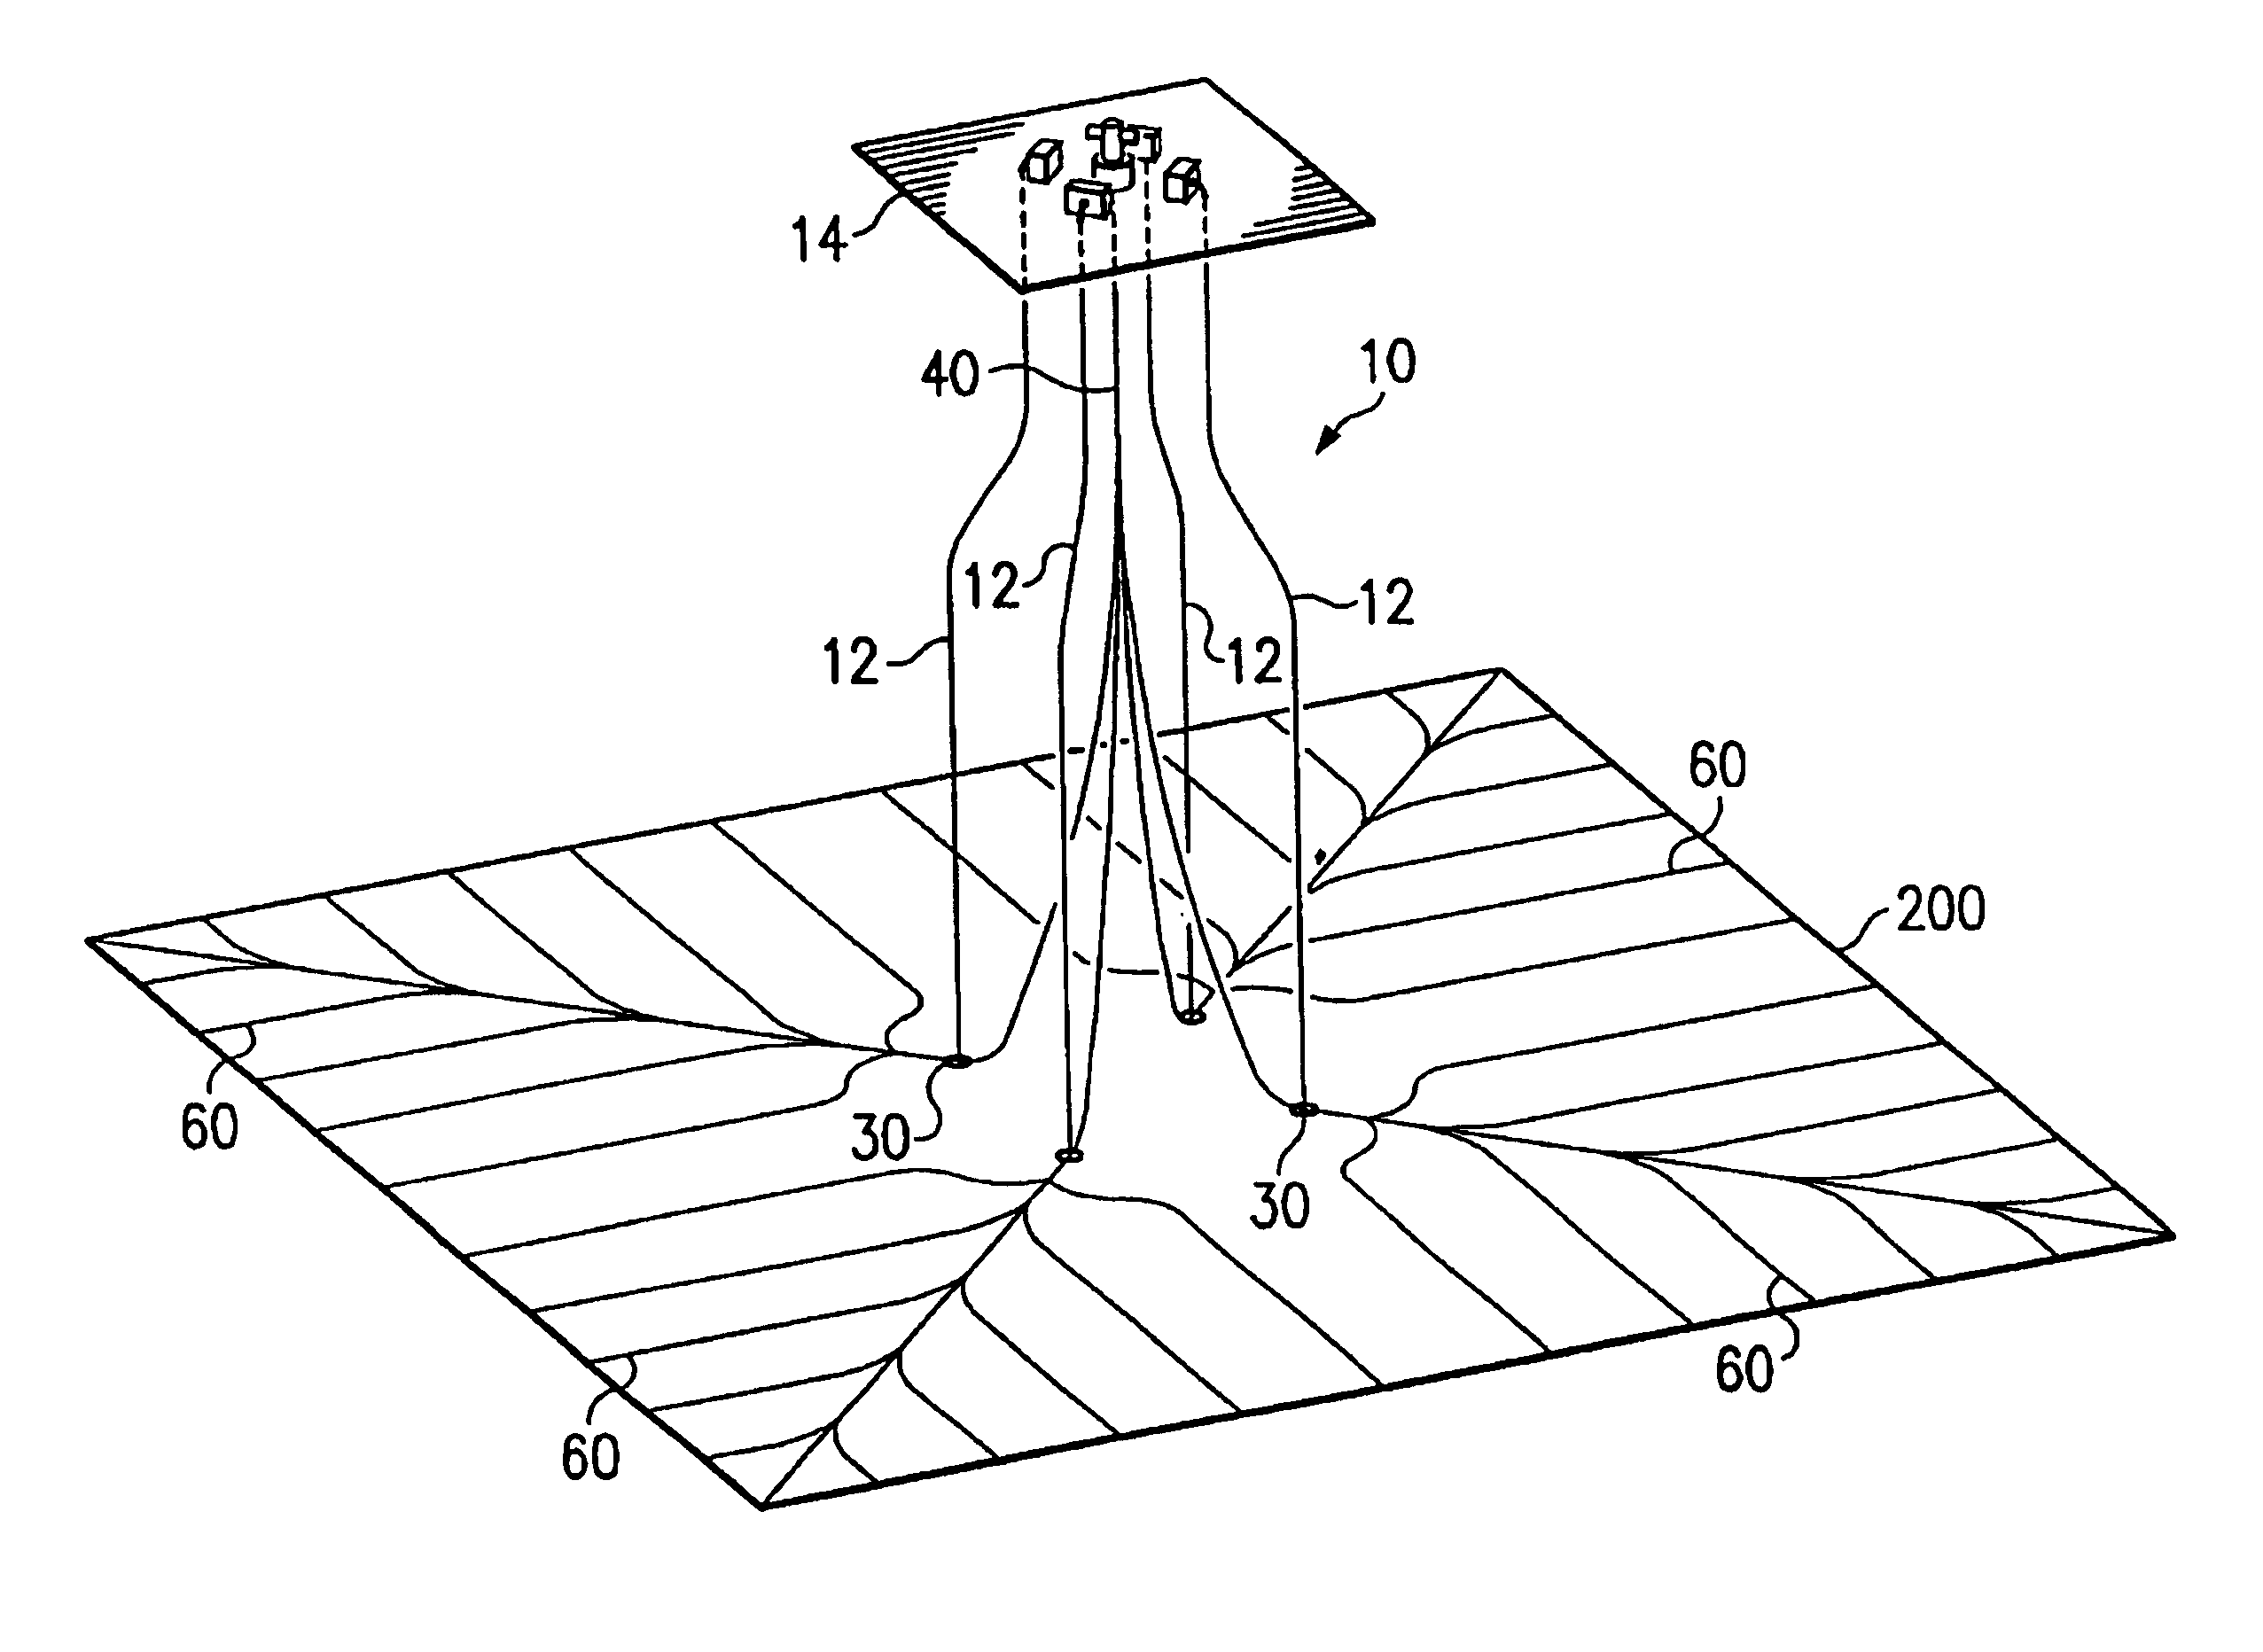 Method and system for accessing a subterranean zone from a limited surface area